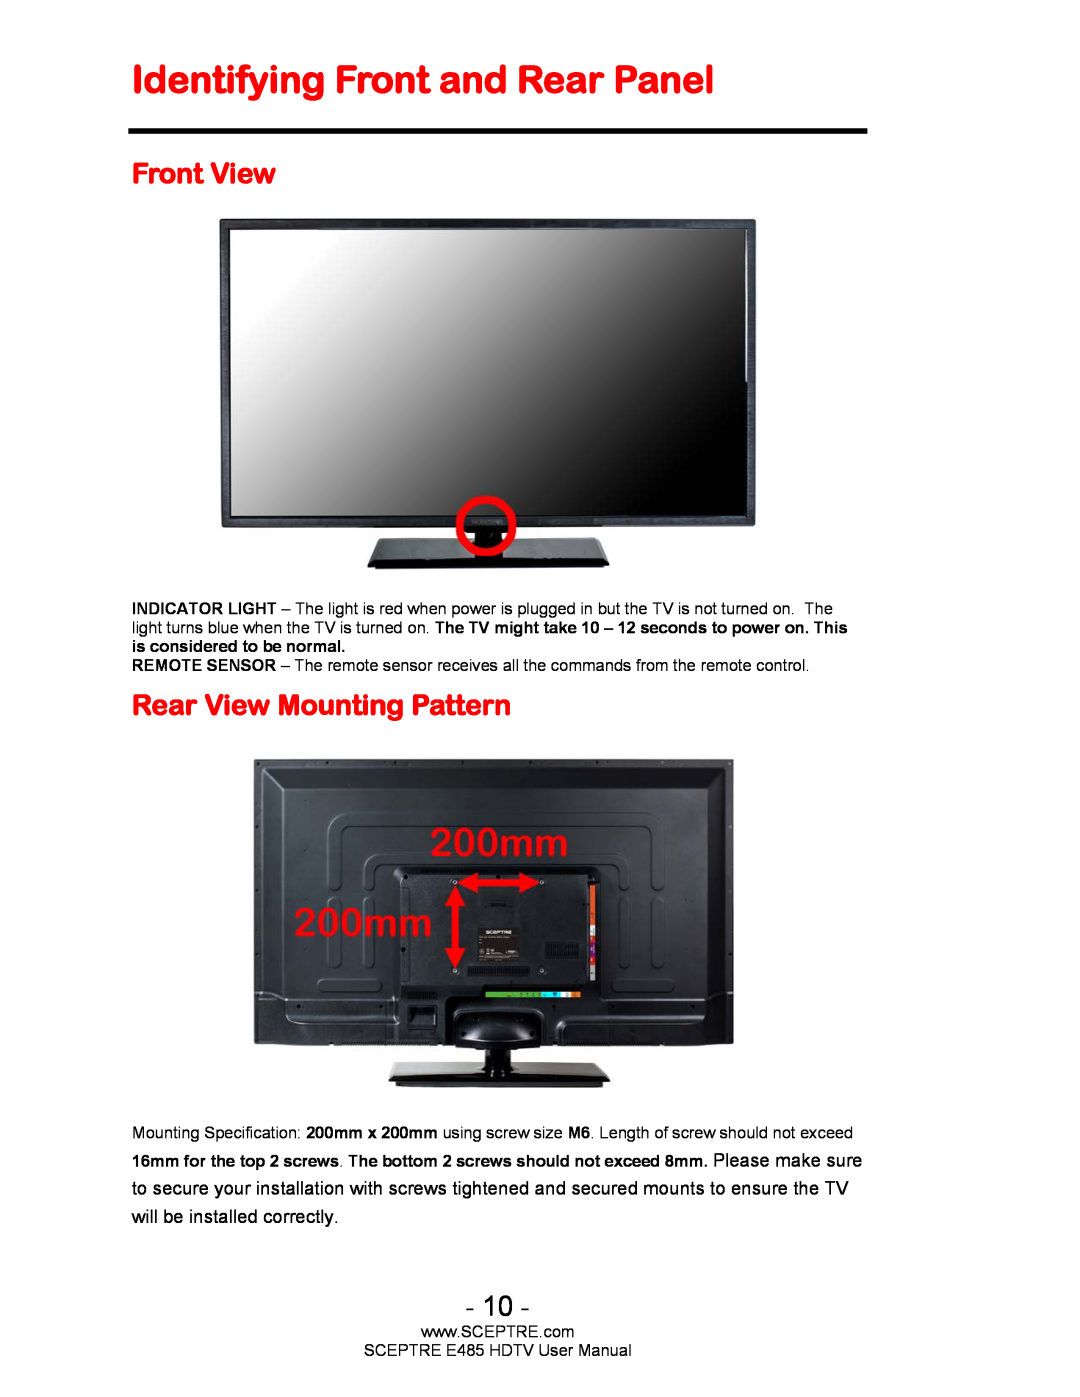 Sceptre Technologies E485 user manual Identifying Front and Rear Panel, Front View, Rear View Mounting Pattern 